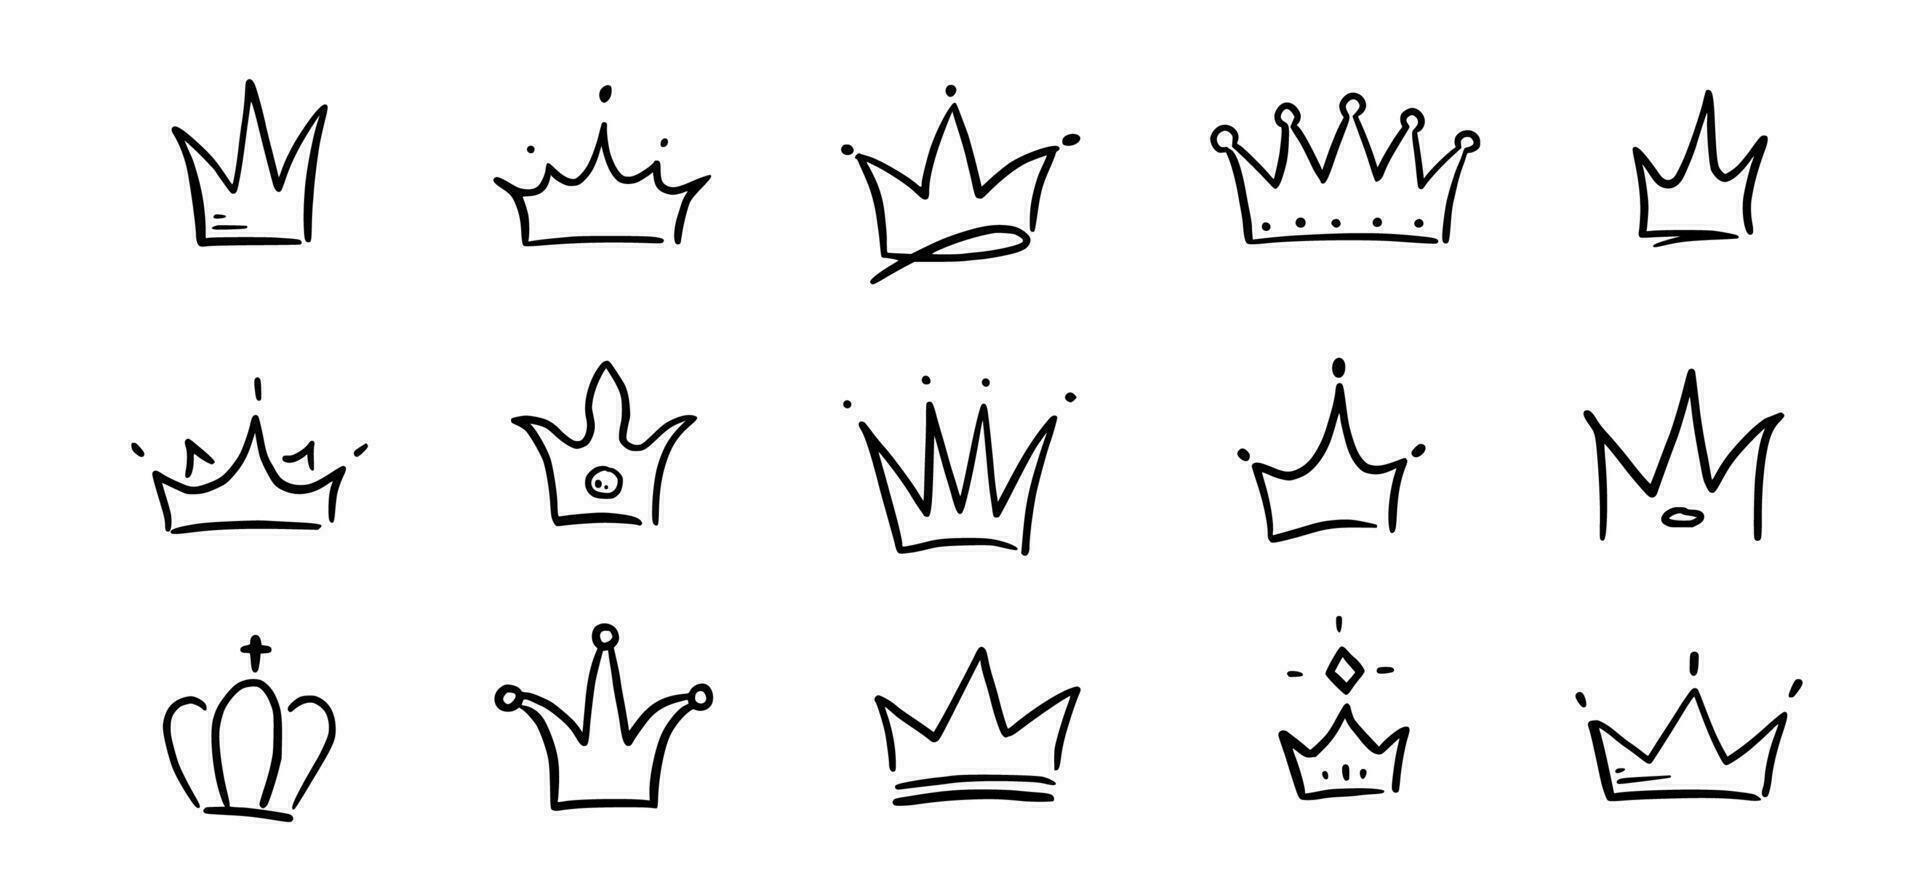 Doodle crown hand drawn set. Doodle princess crown, queen tiara. Line sketch royal element. Queen, king hand drawn simple design element. Isolated vector